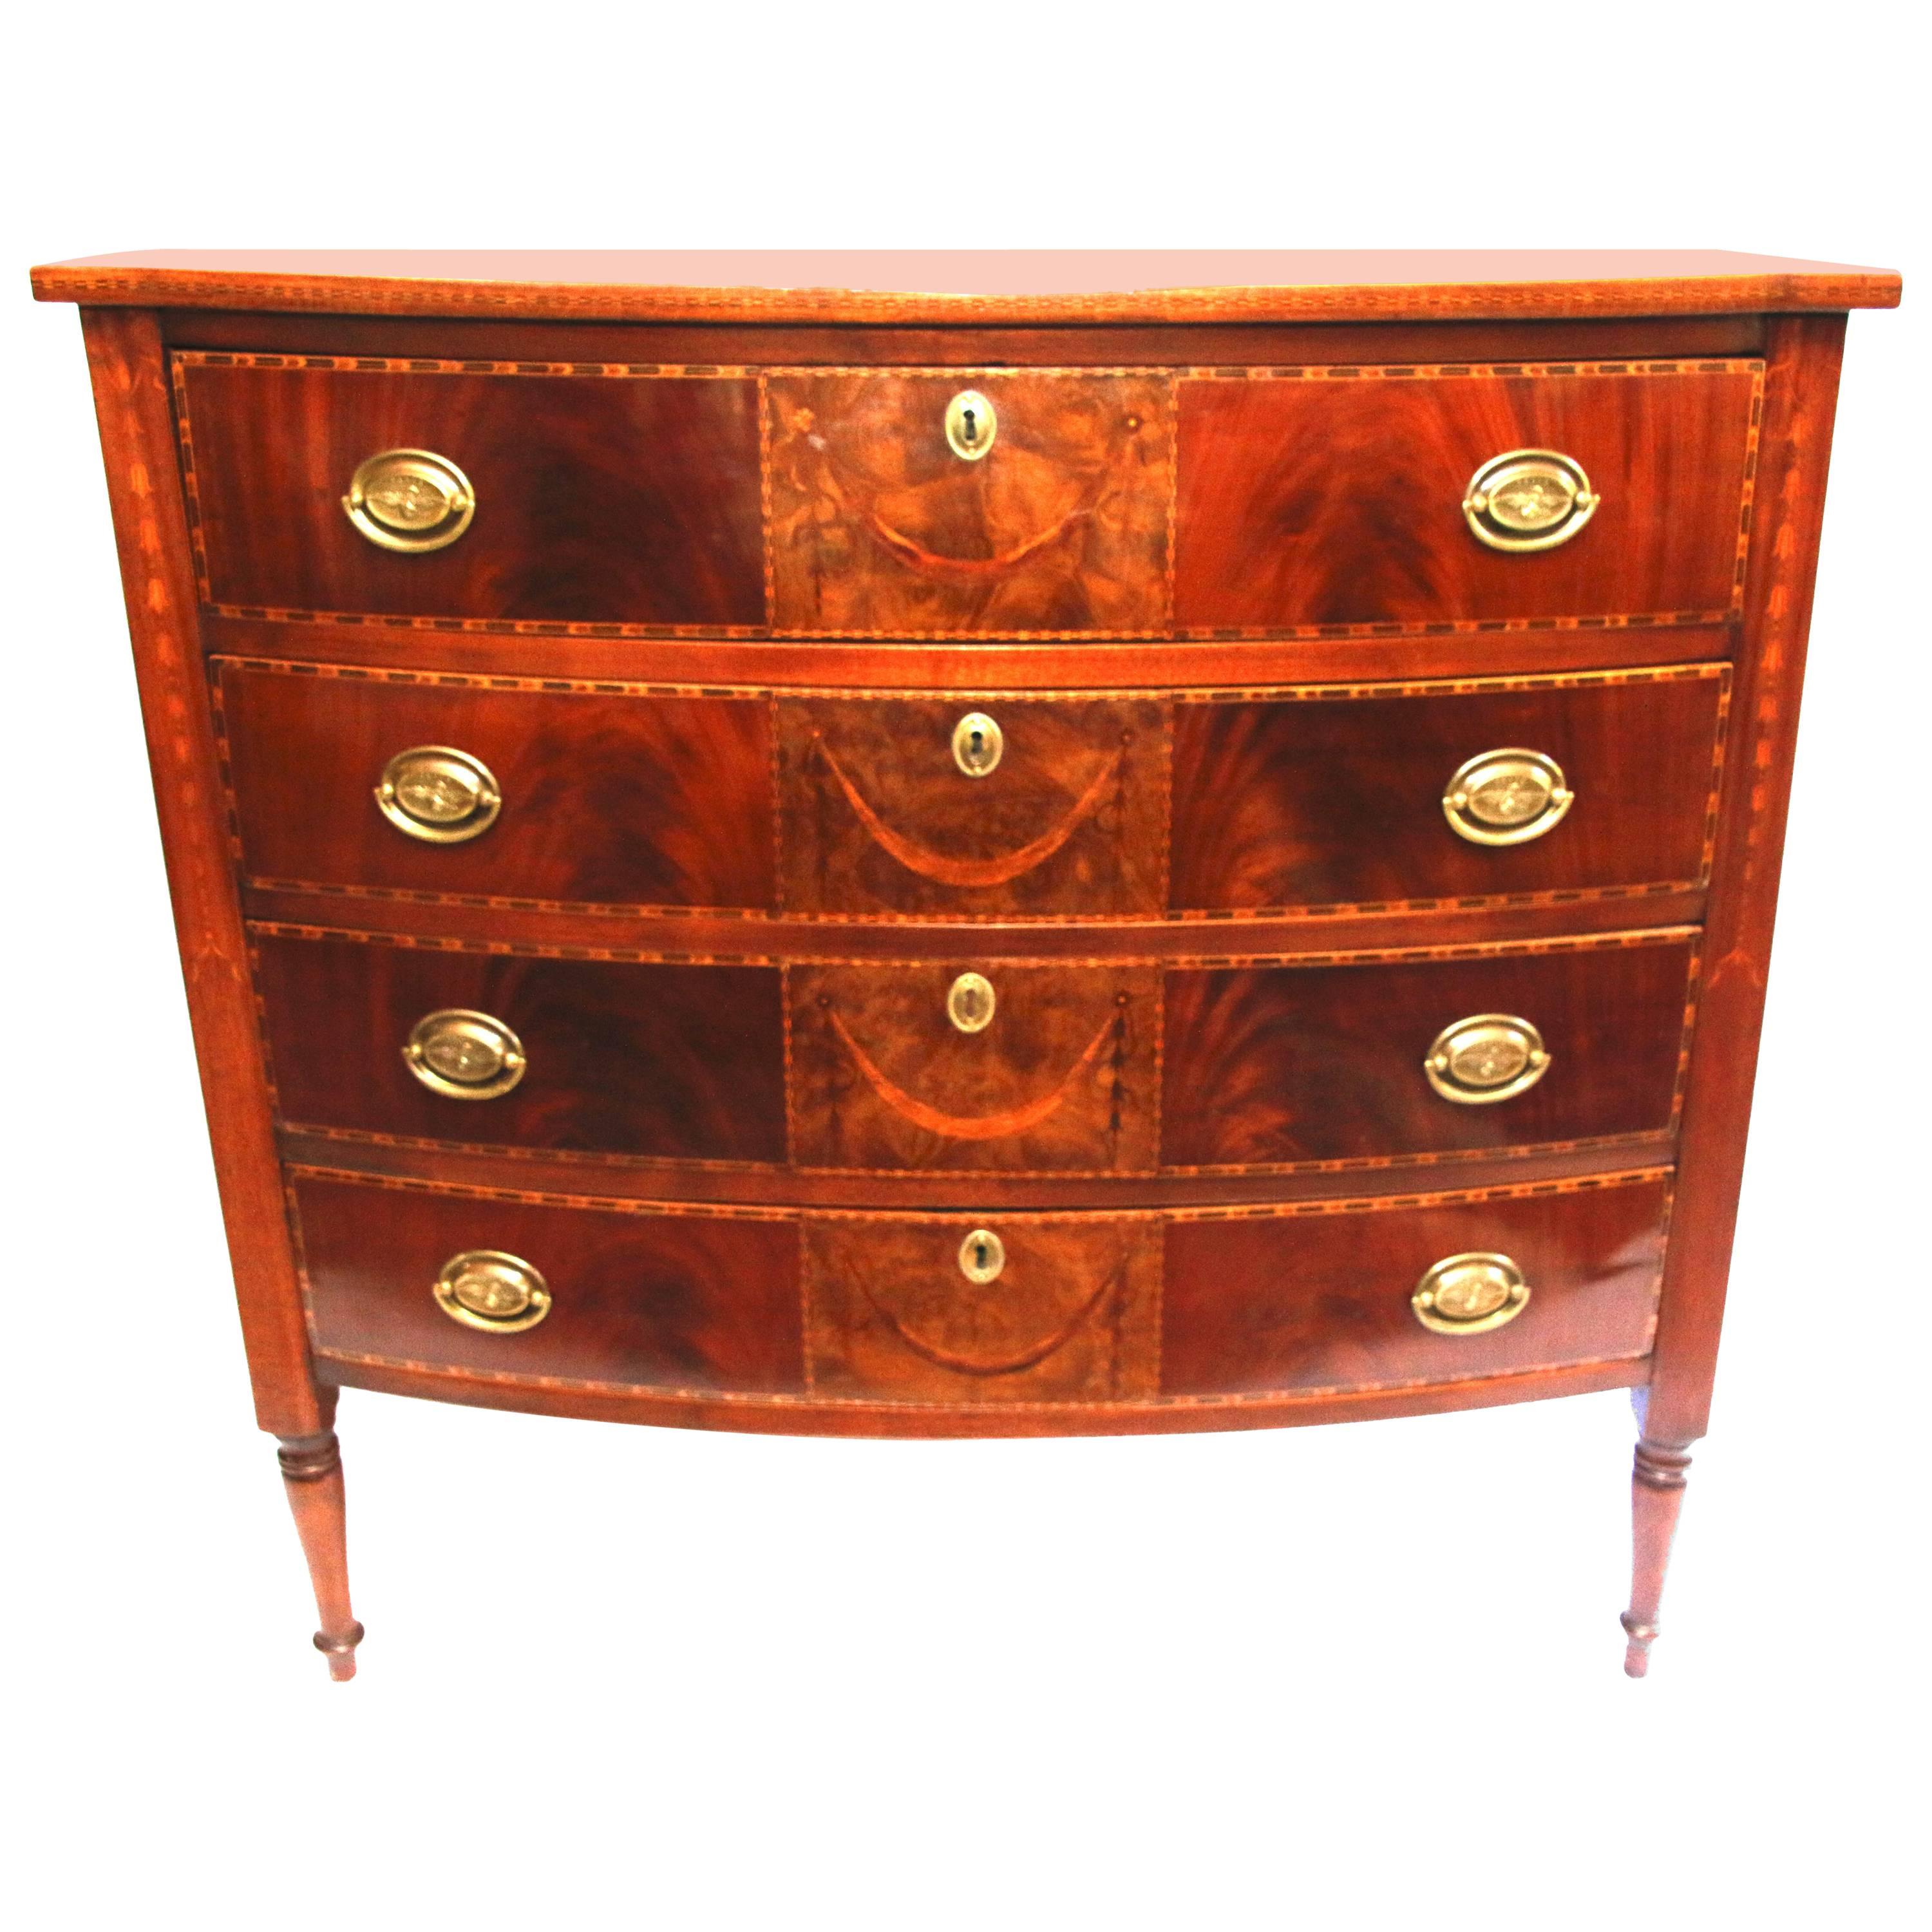 19th Century Sheraton Four-Drawer Inlaid Bowfront Chest of Drawers For Sale